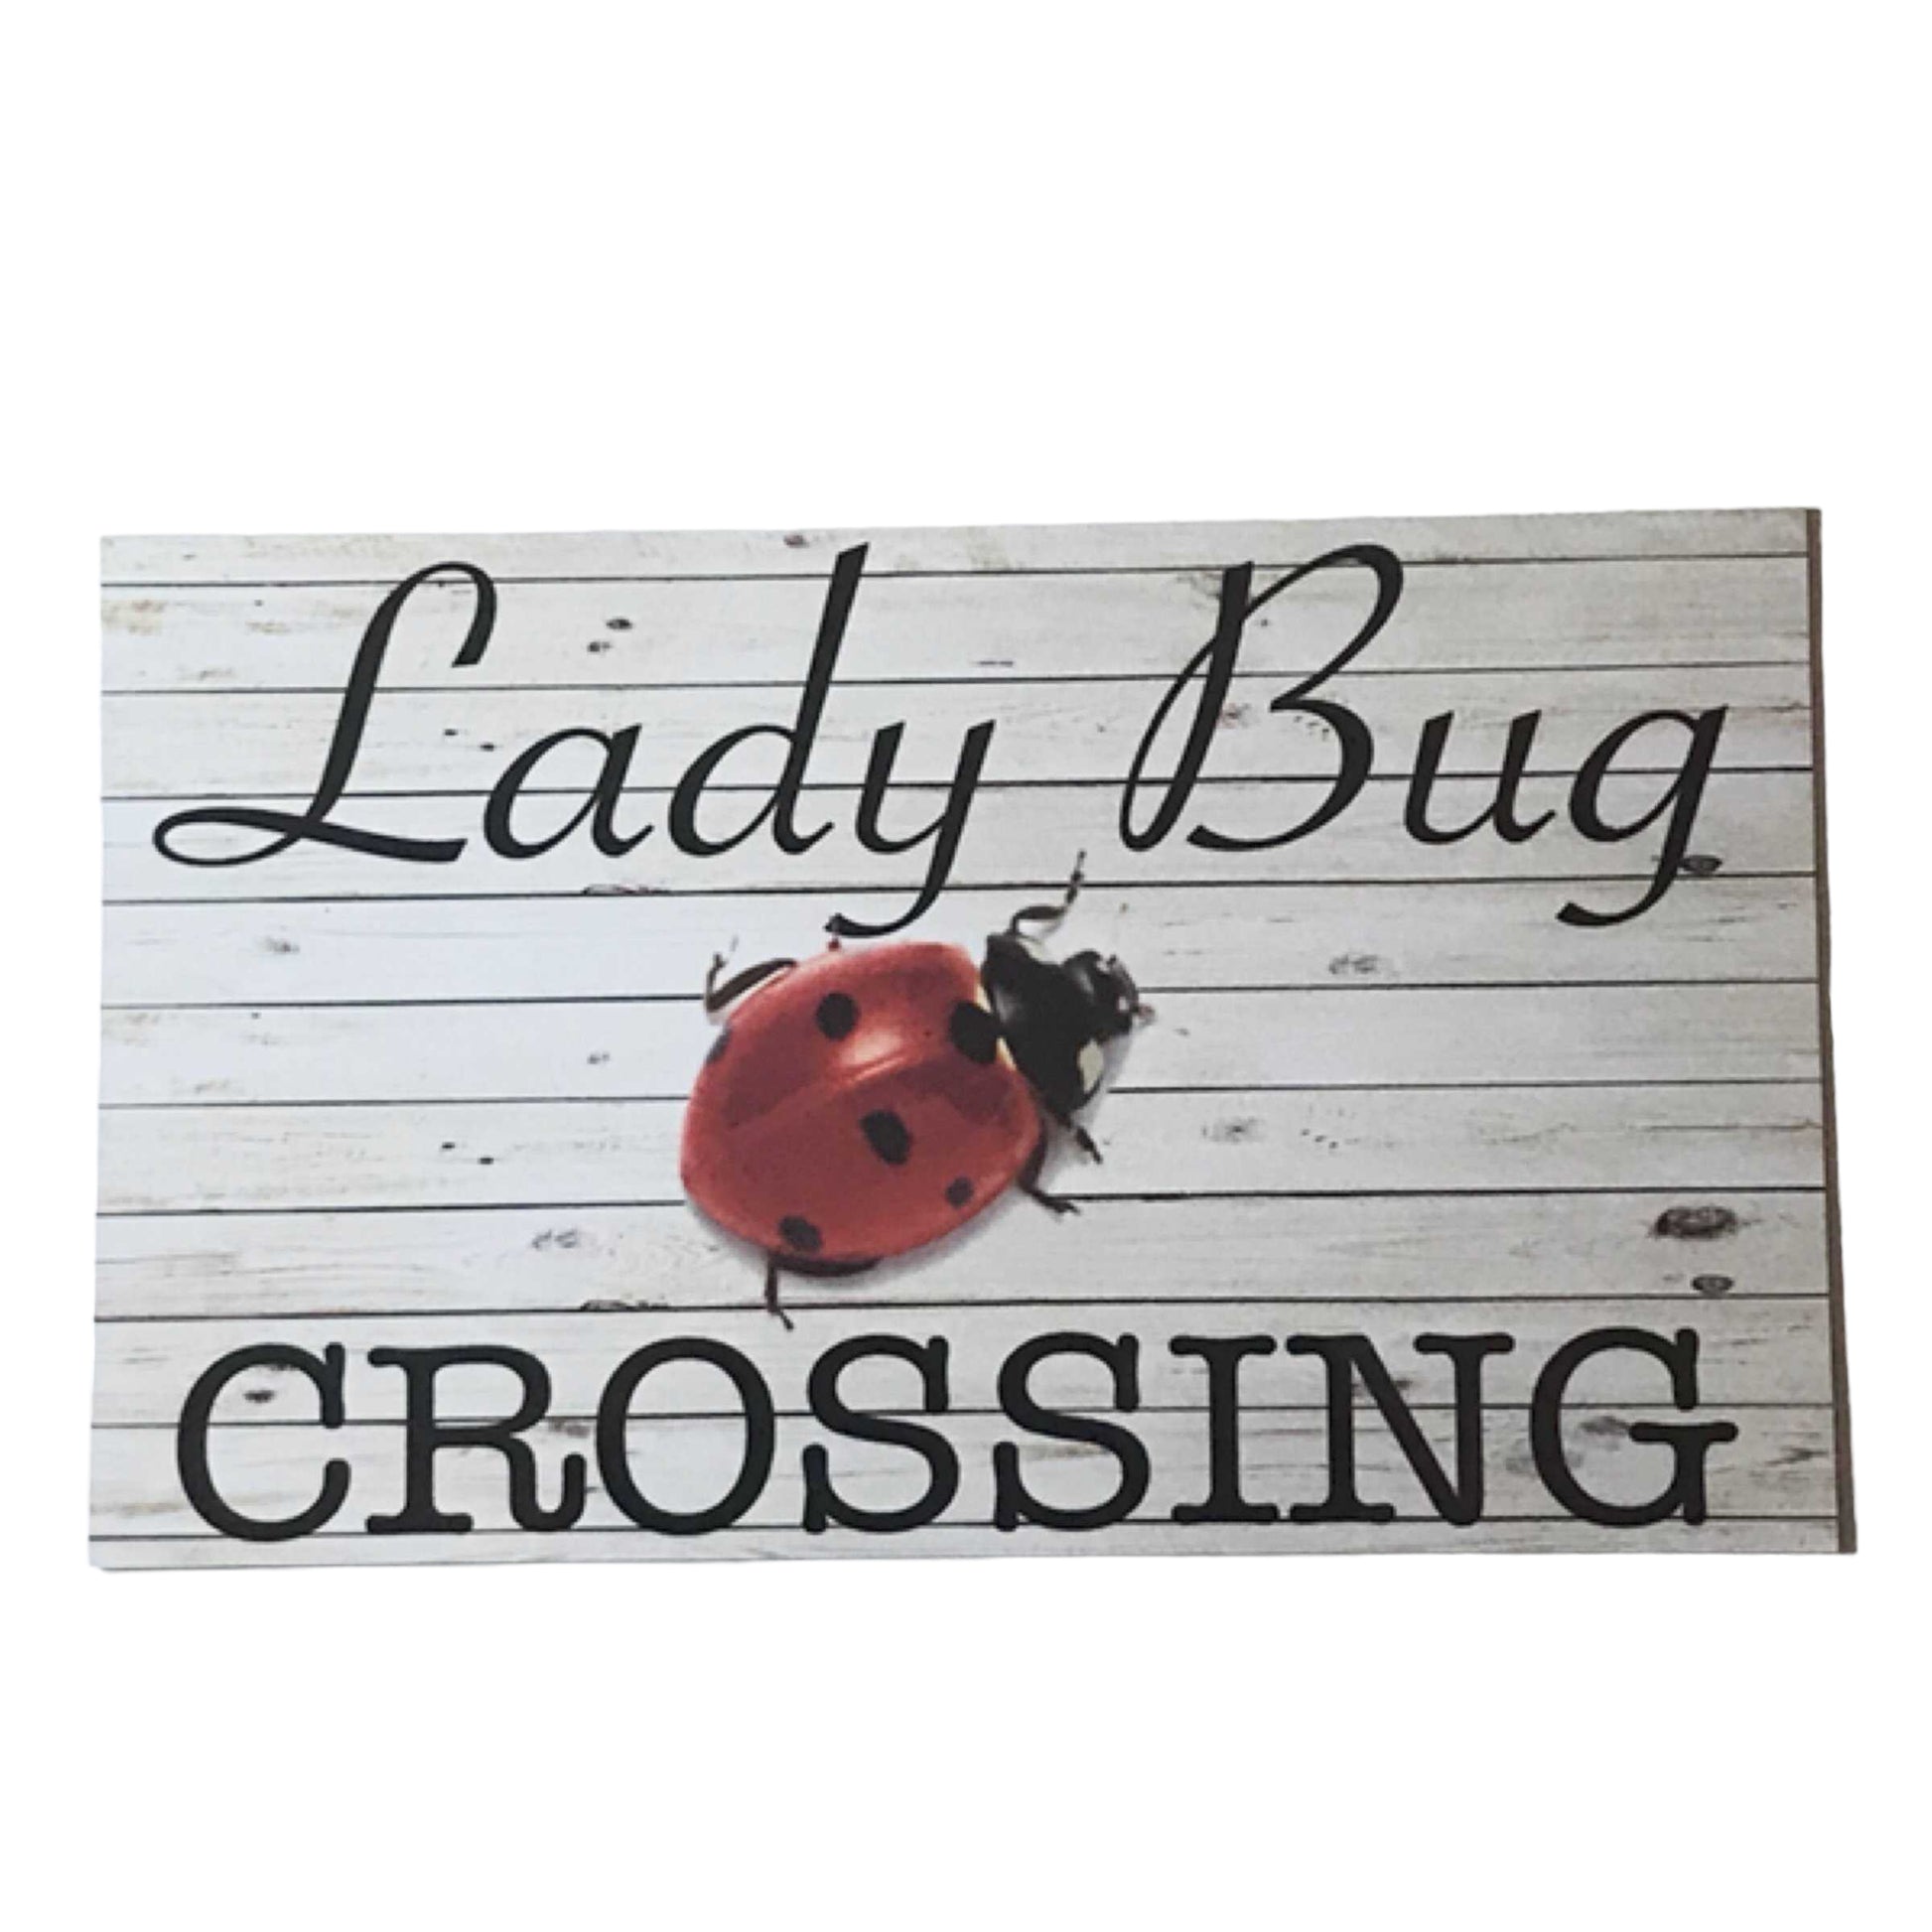 Lady Bug Beetle Crossing Sign - The Renmy Store Homewares & Gifts 